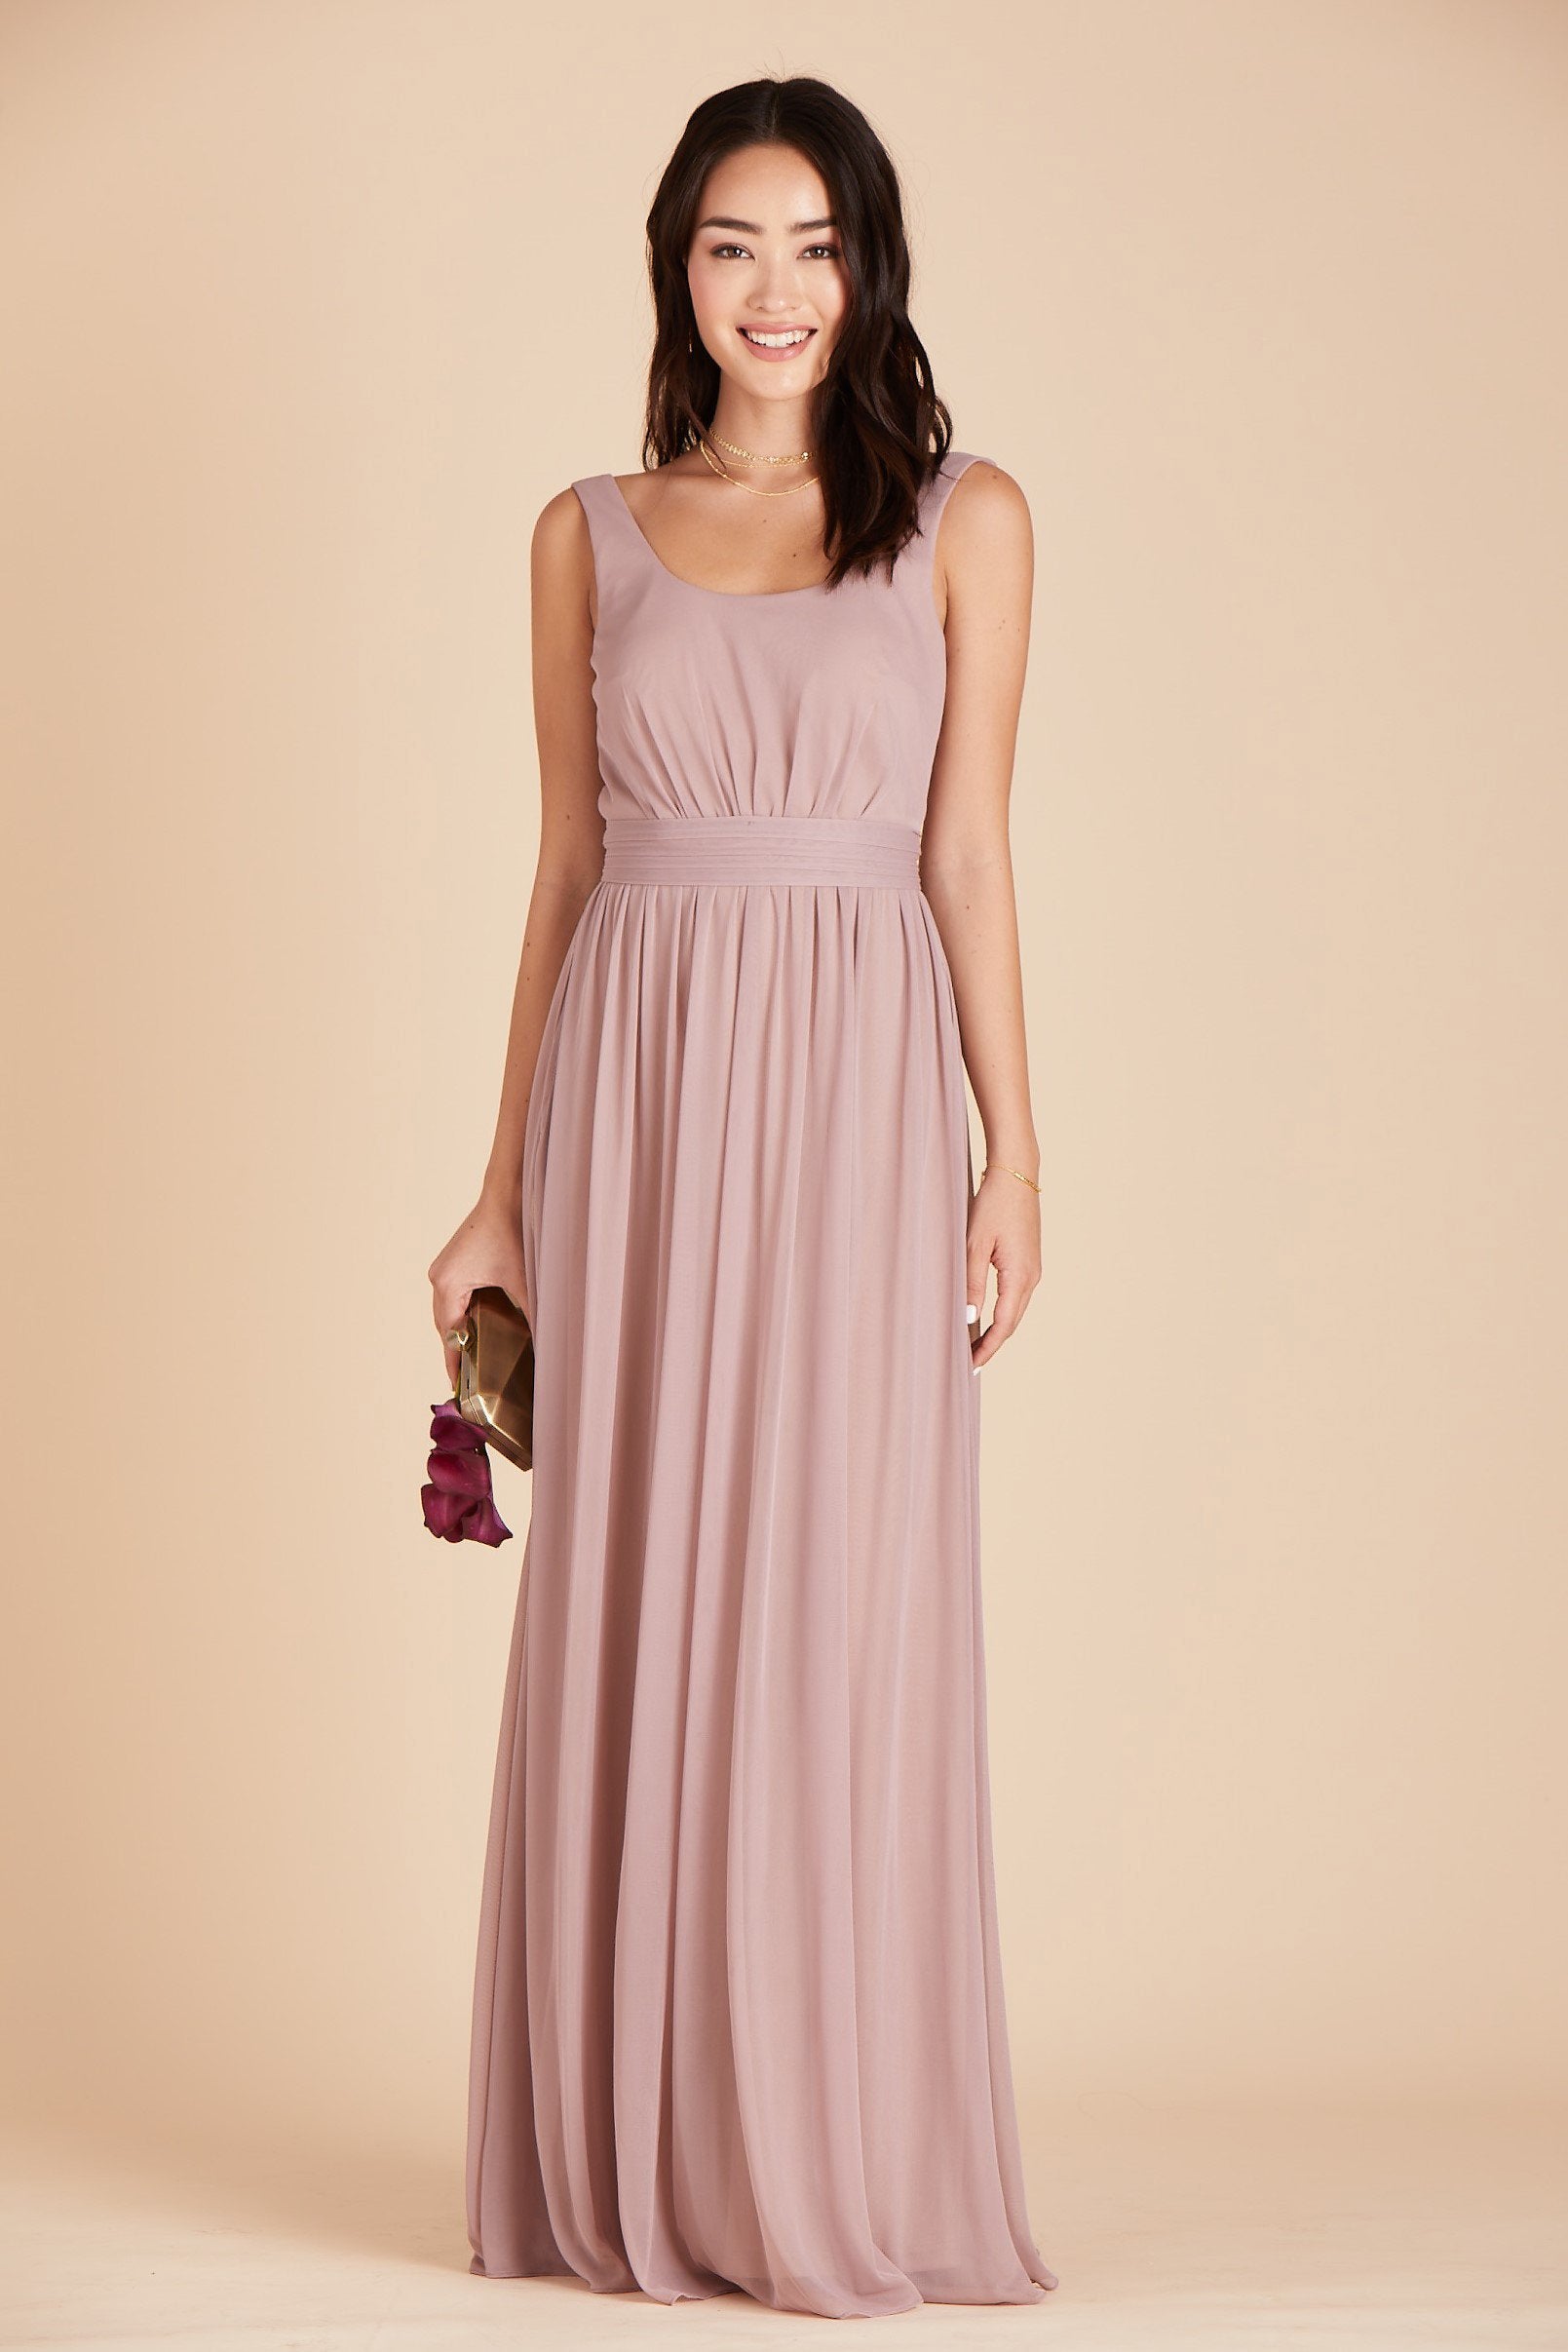 Jay bridesmaids dress in mauve chiffon by Birdy Grey, front view